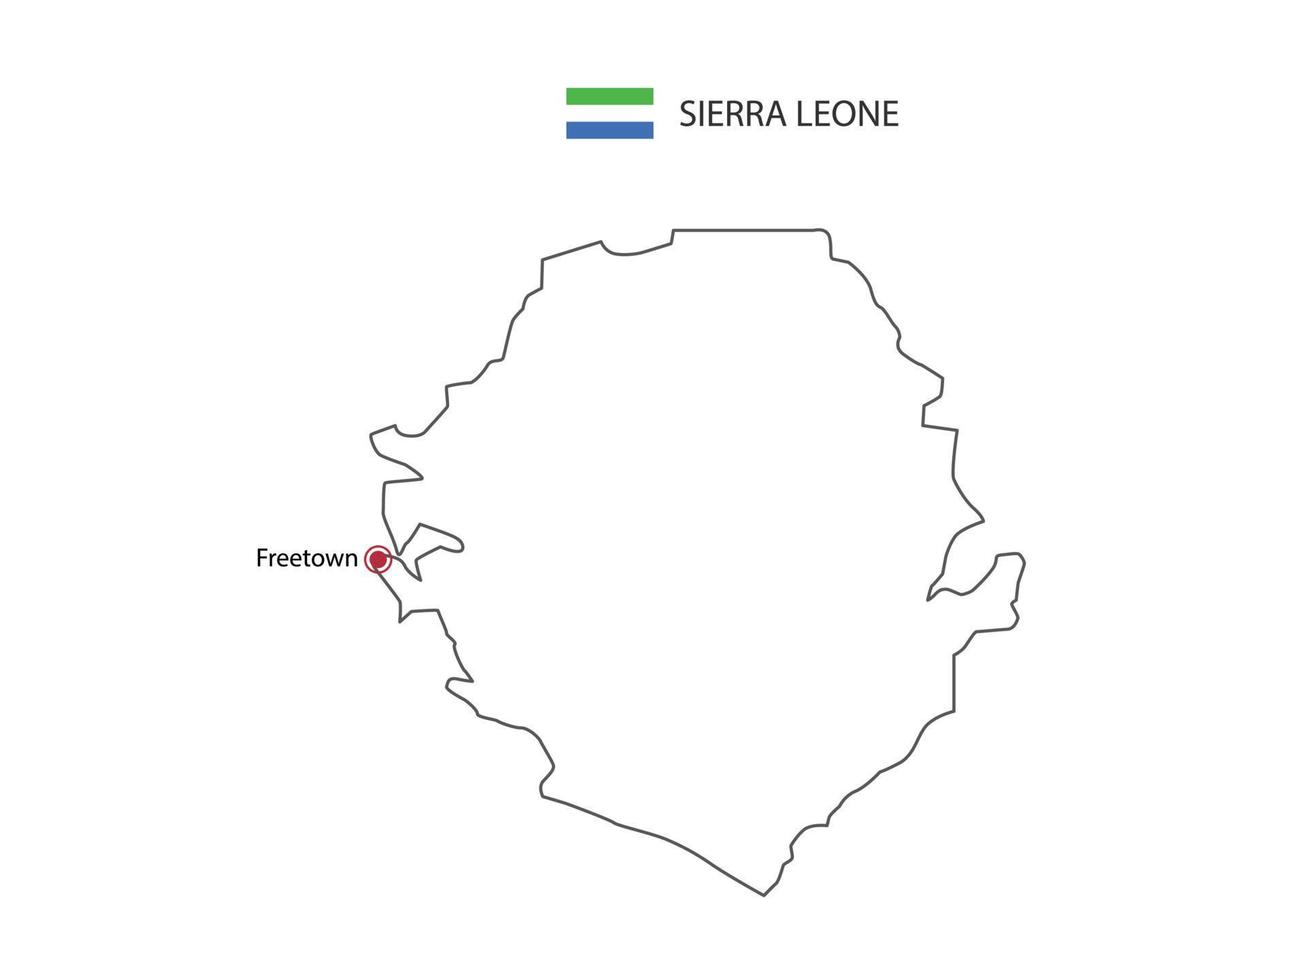 Hand draw thin black line vector of Sierra Leone Map with capital city Freetown on white background.